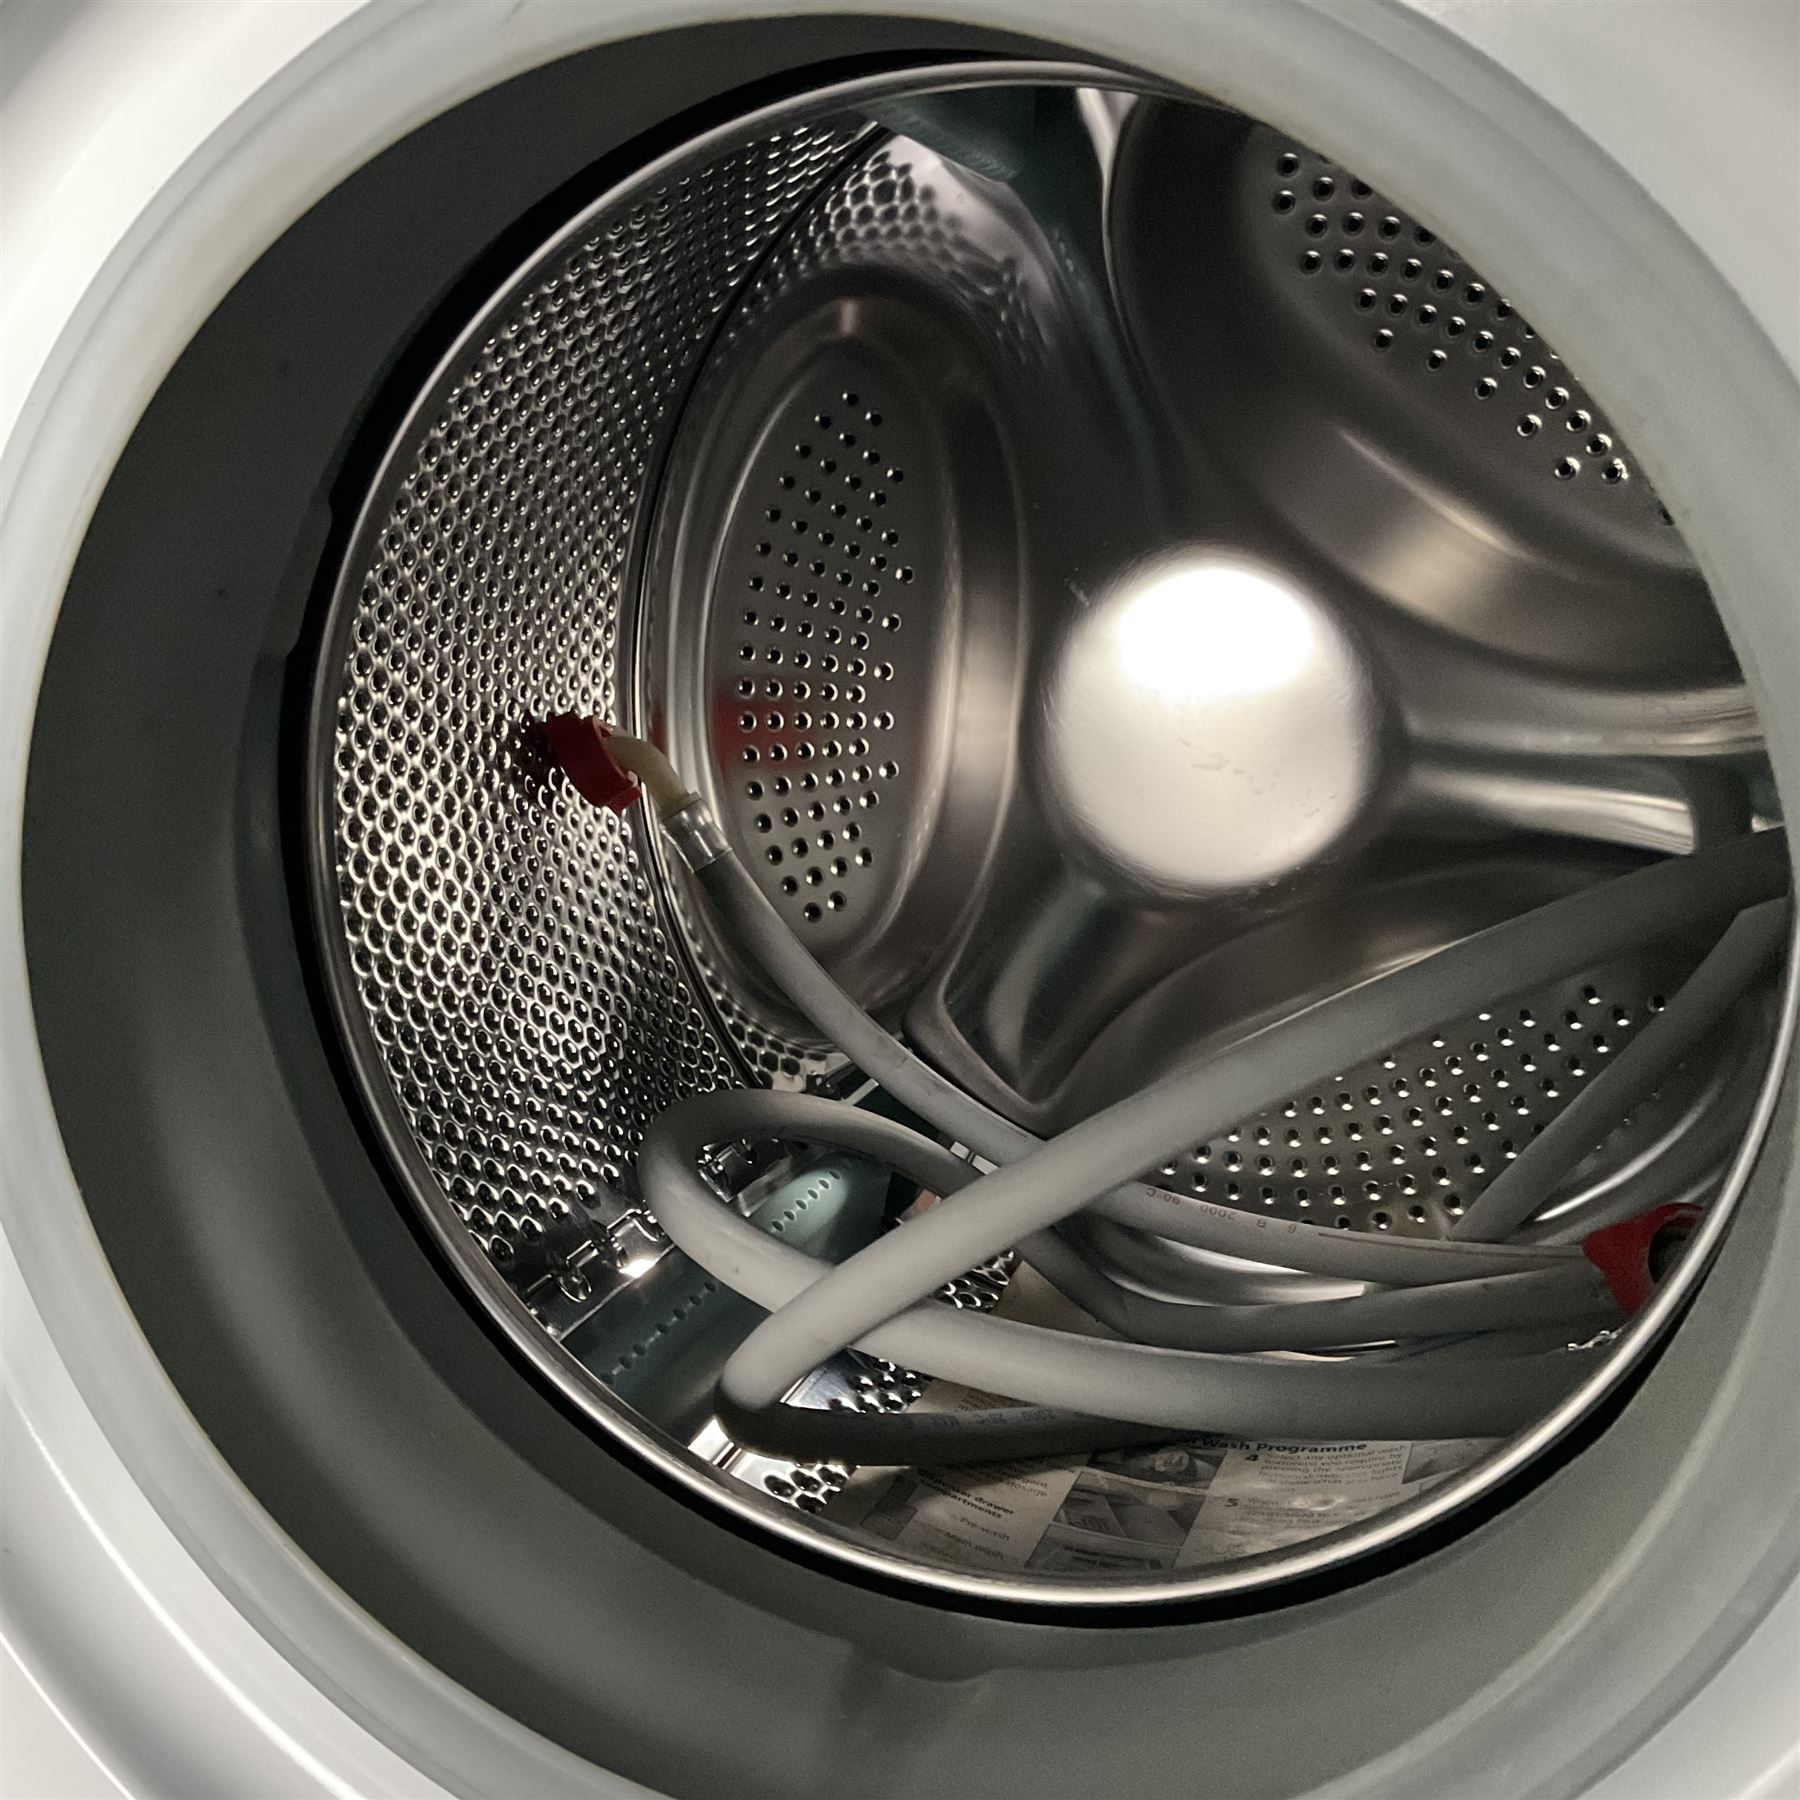 Hotpoint first edition washing machine - Image 3 of 3